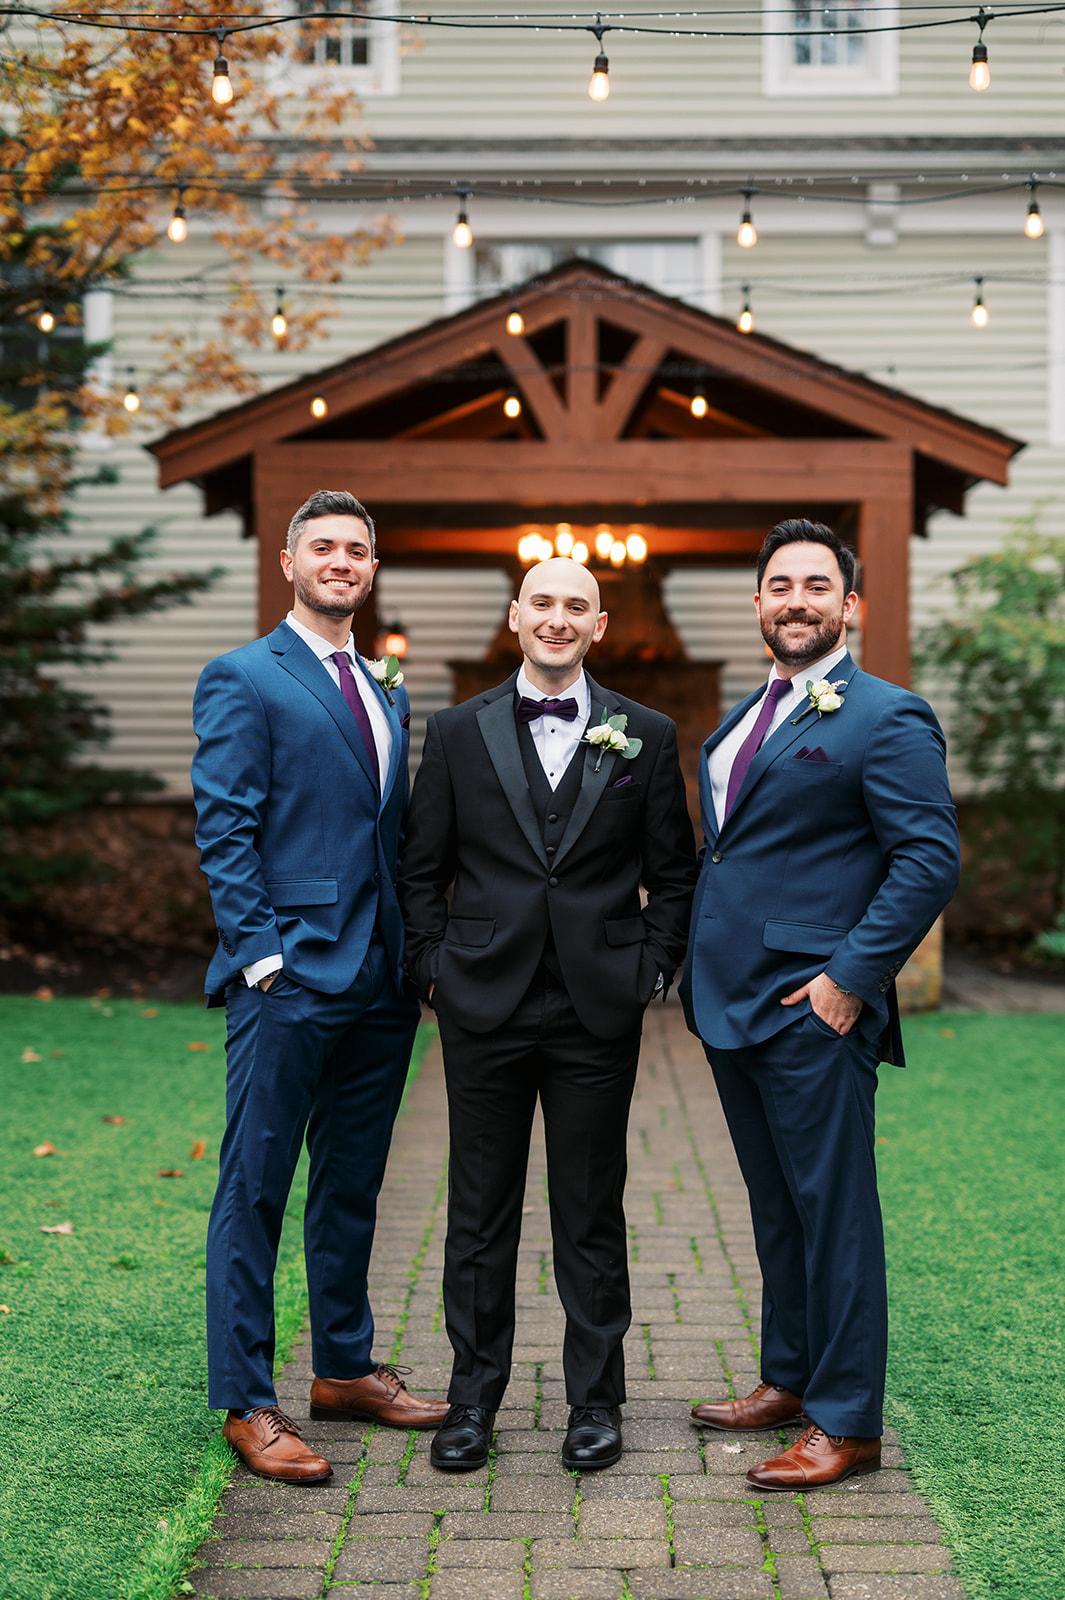 A groom stands in a black suit with 2 groomsmen in blue suits outside under market lights at an Olde Mill Inn Wedding